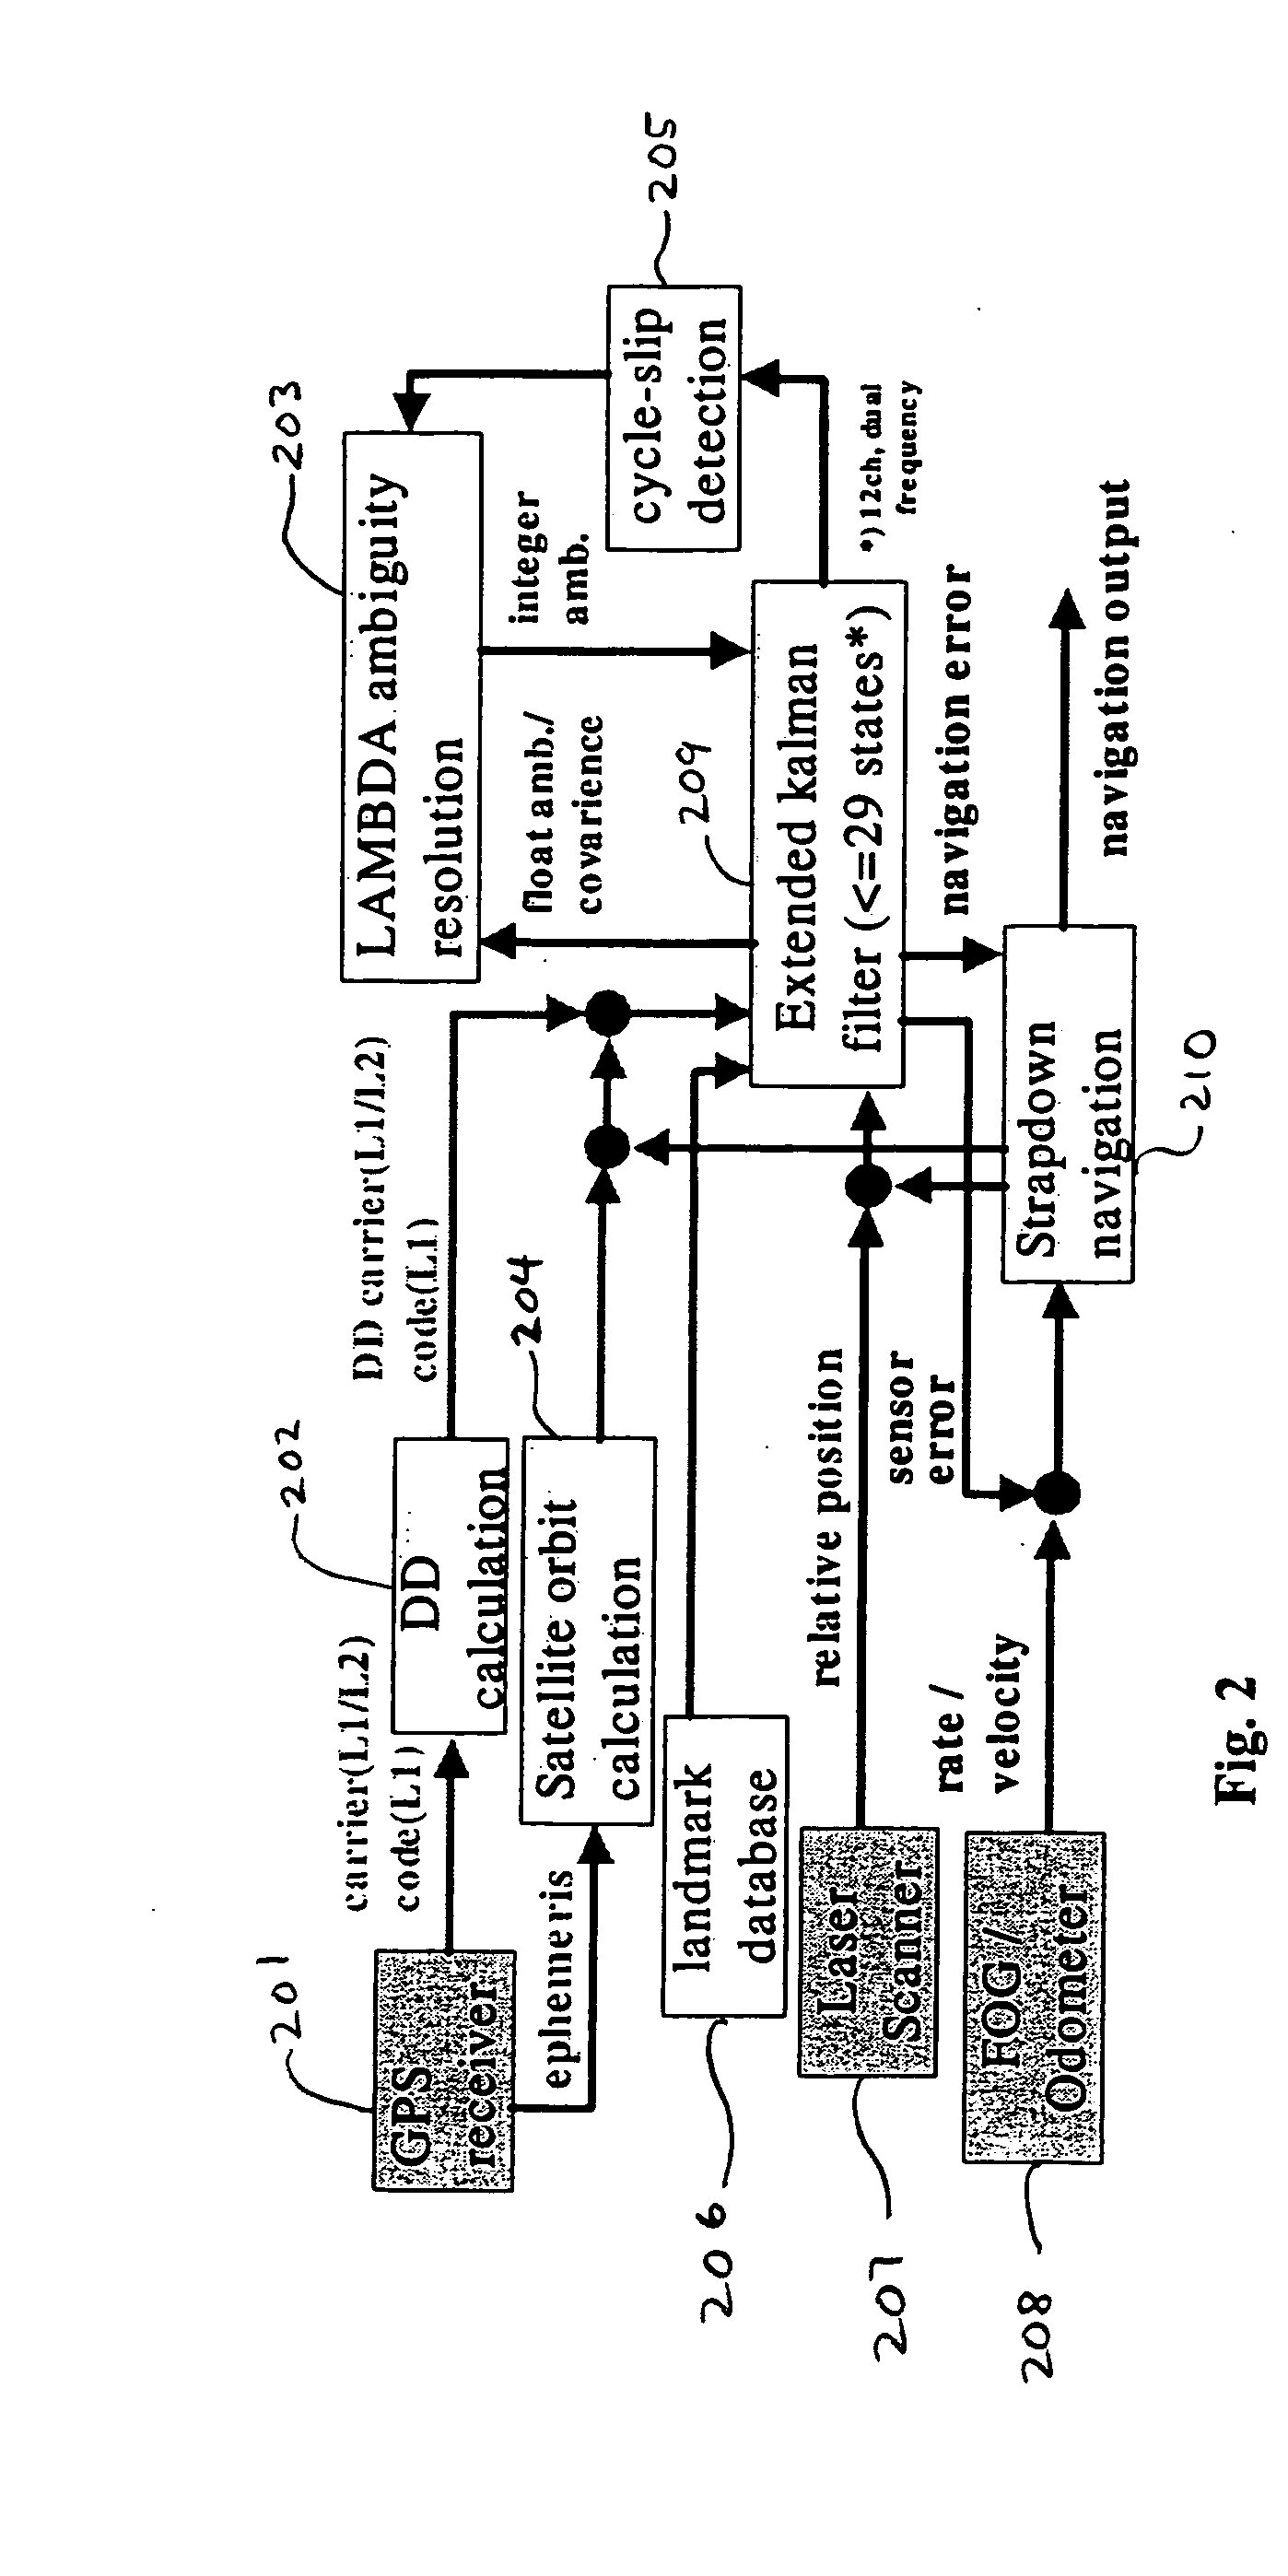 System for autonomous vehicle navigation with carrier phase DGPS and laser-scanner augmentation